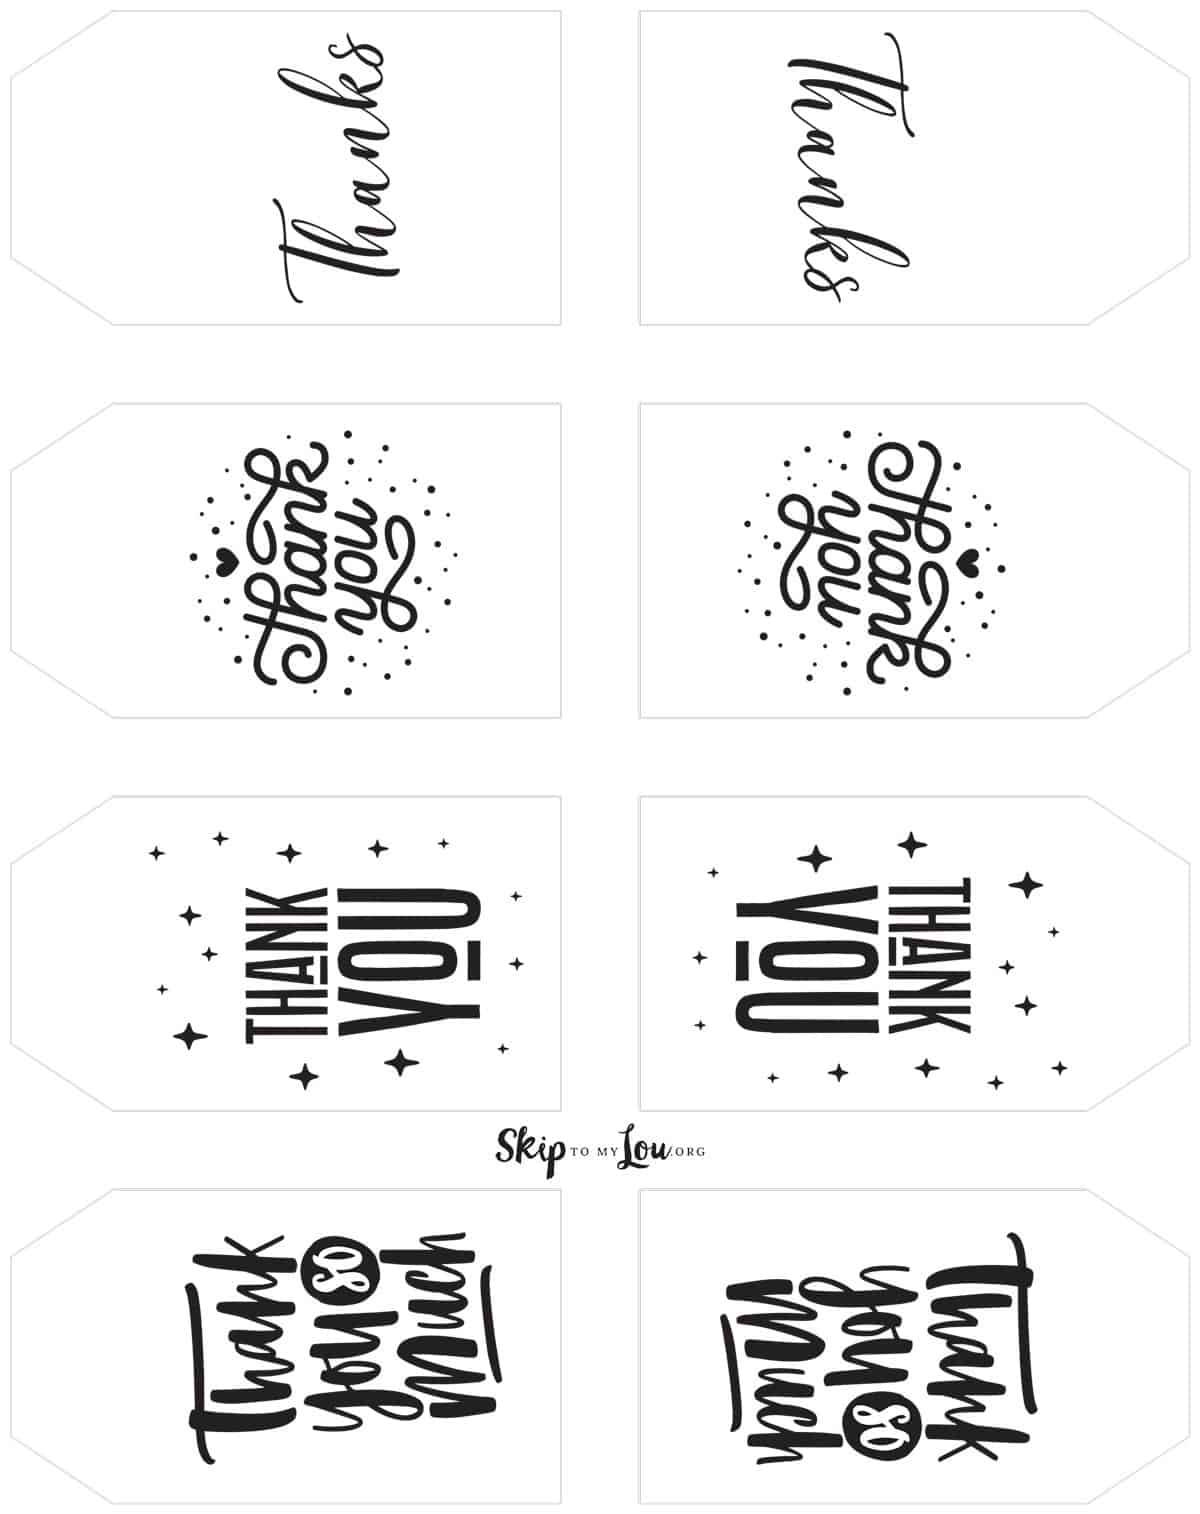 Printable Thank you tags ready for download, in black and white.